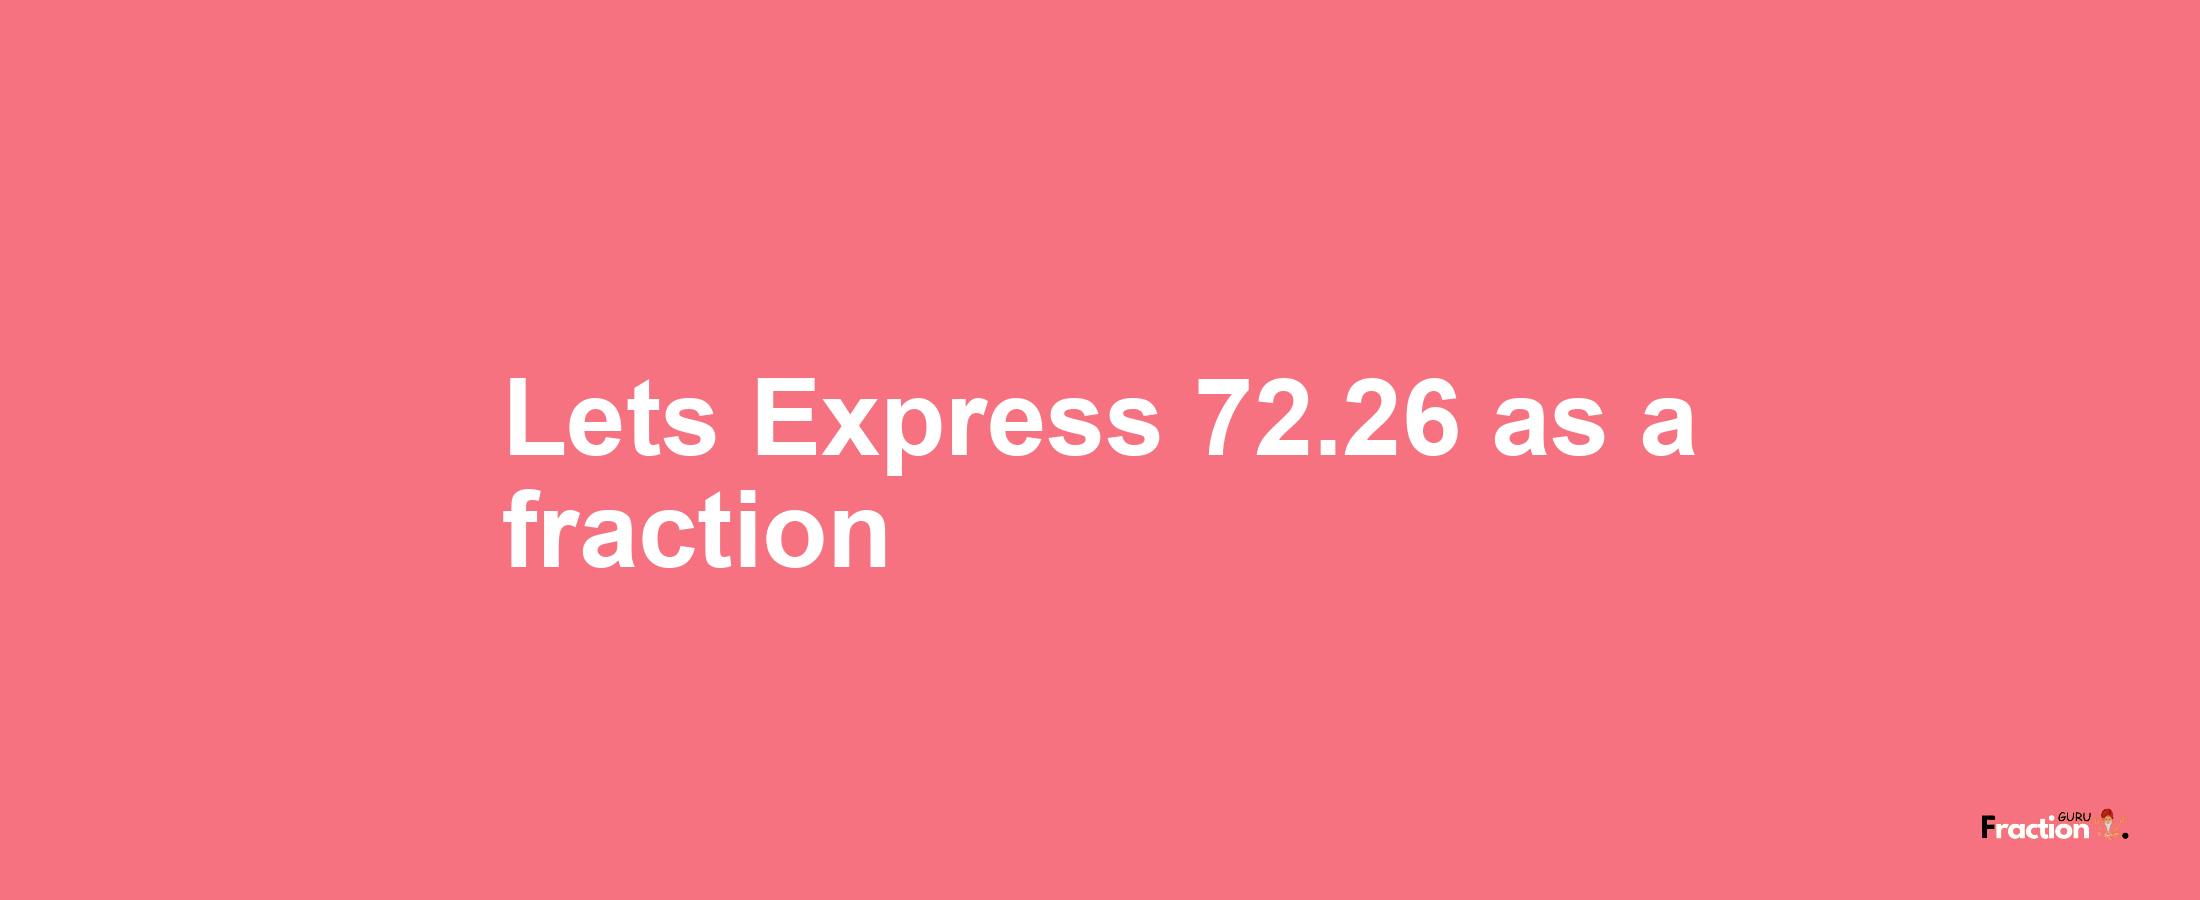 Lets Express 72.26 as afraction